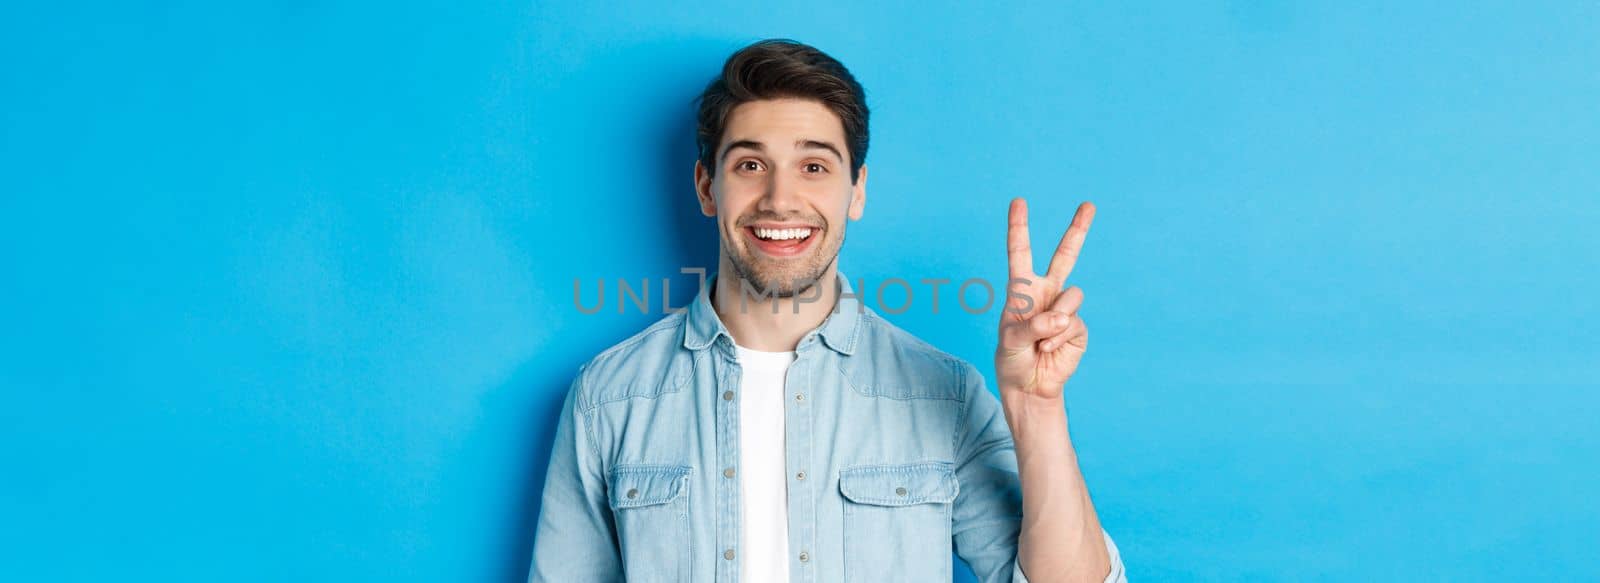 Close-up of handsome man smiling, showing fingers number two, standing over blue background.